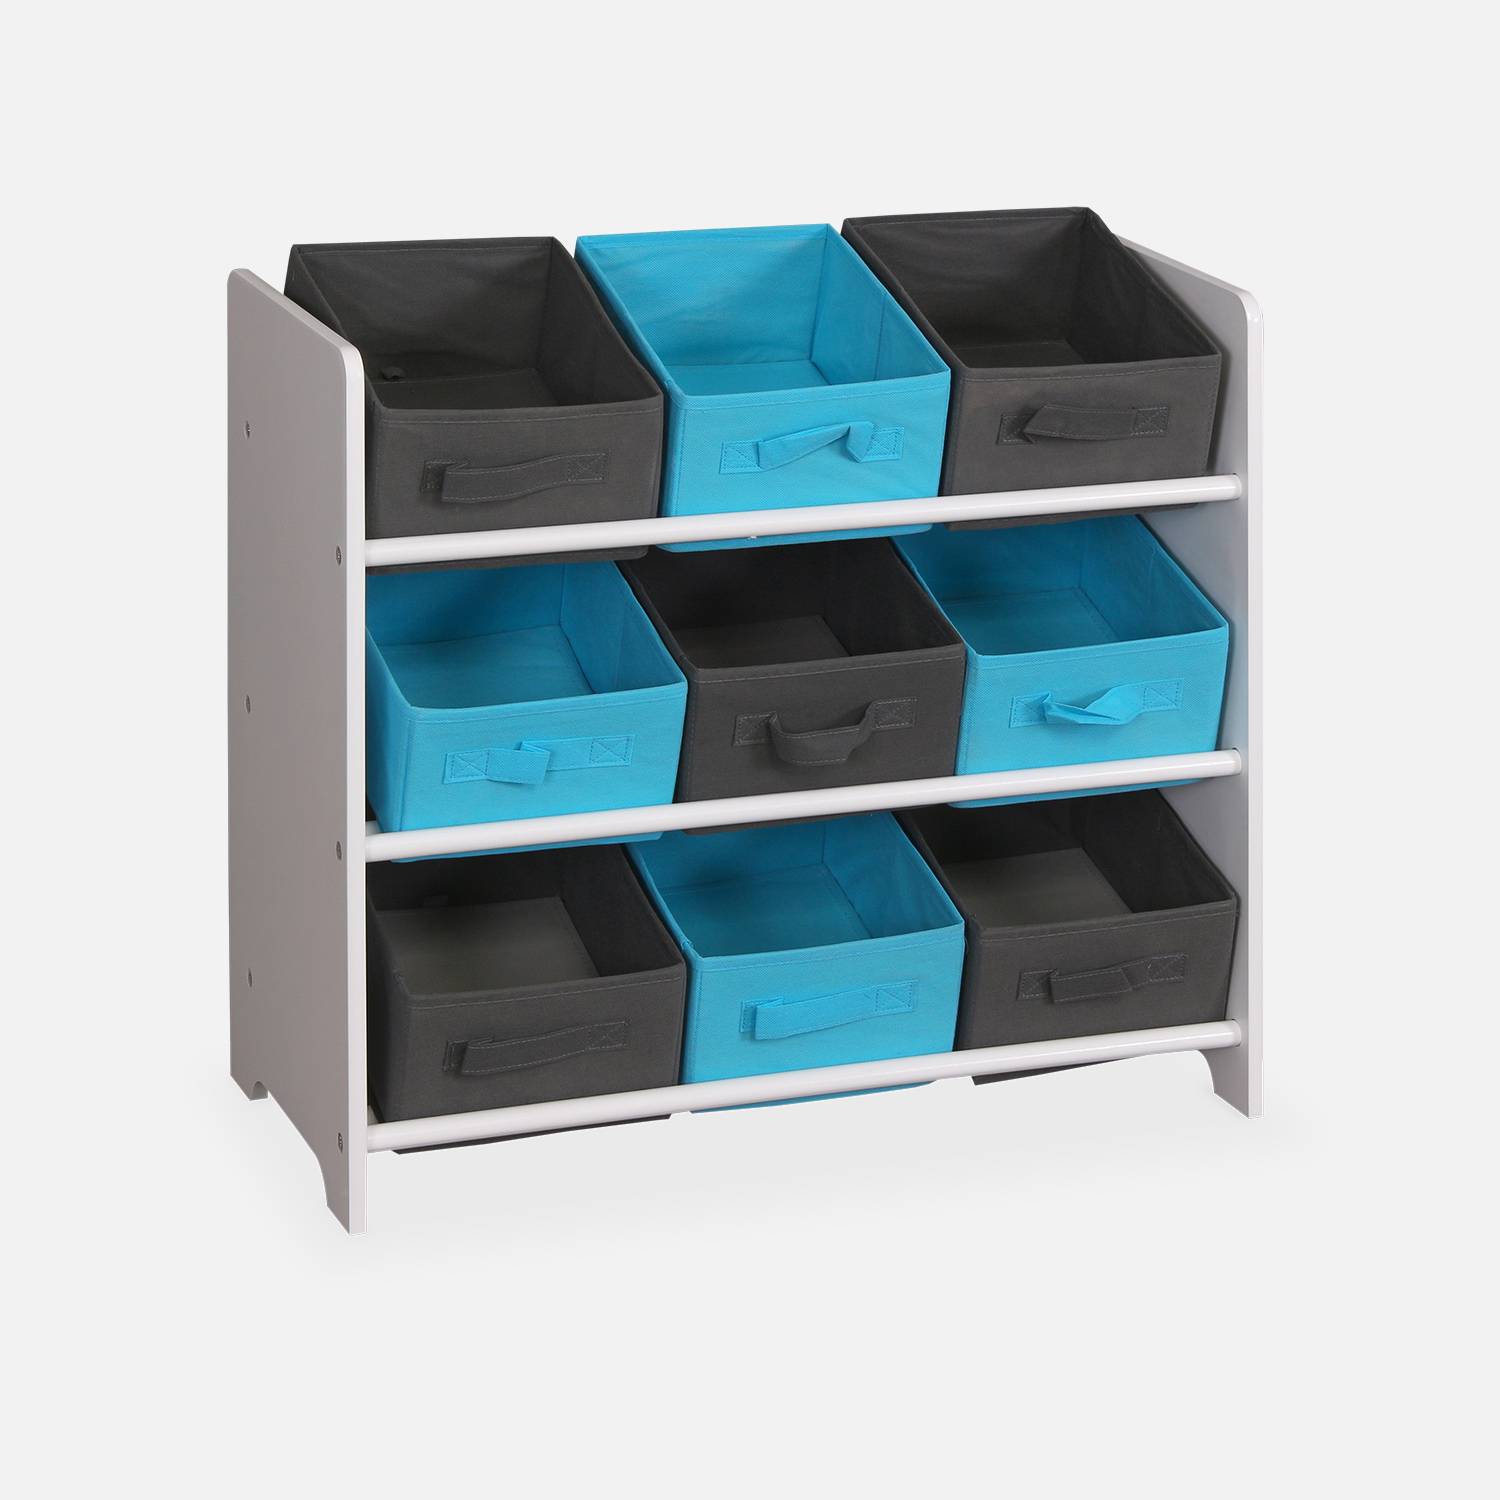 Storage combination with 9 boxes for kids toy, Grey and Blue | sweeek